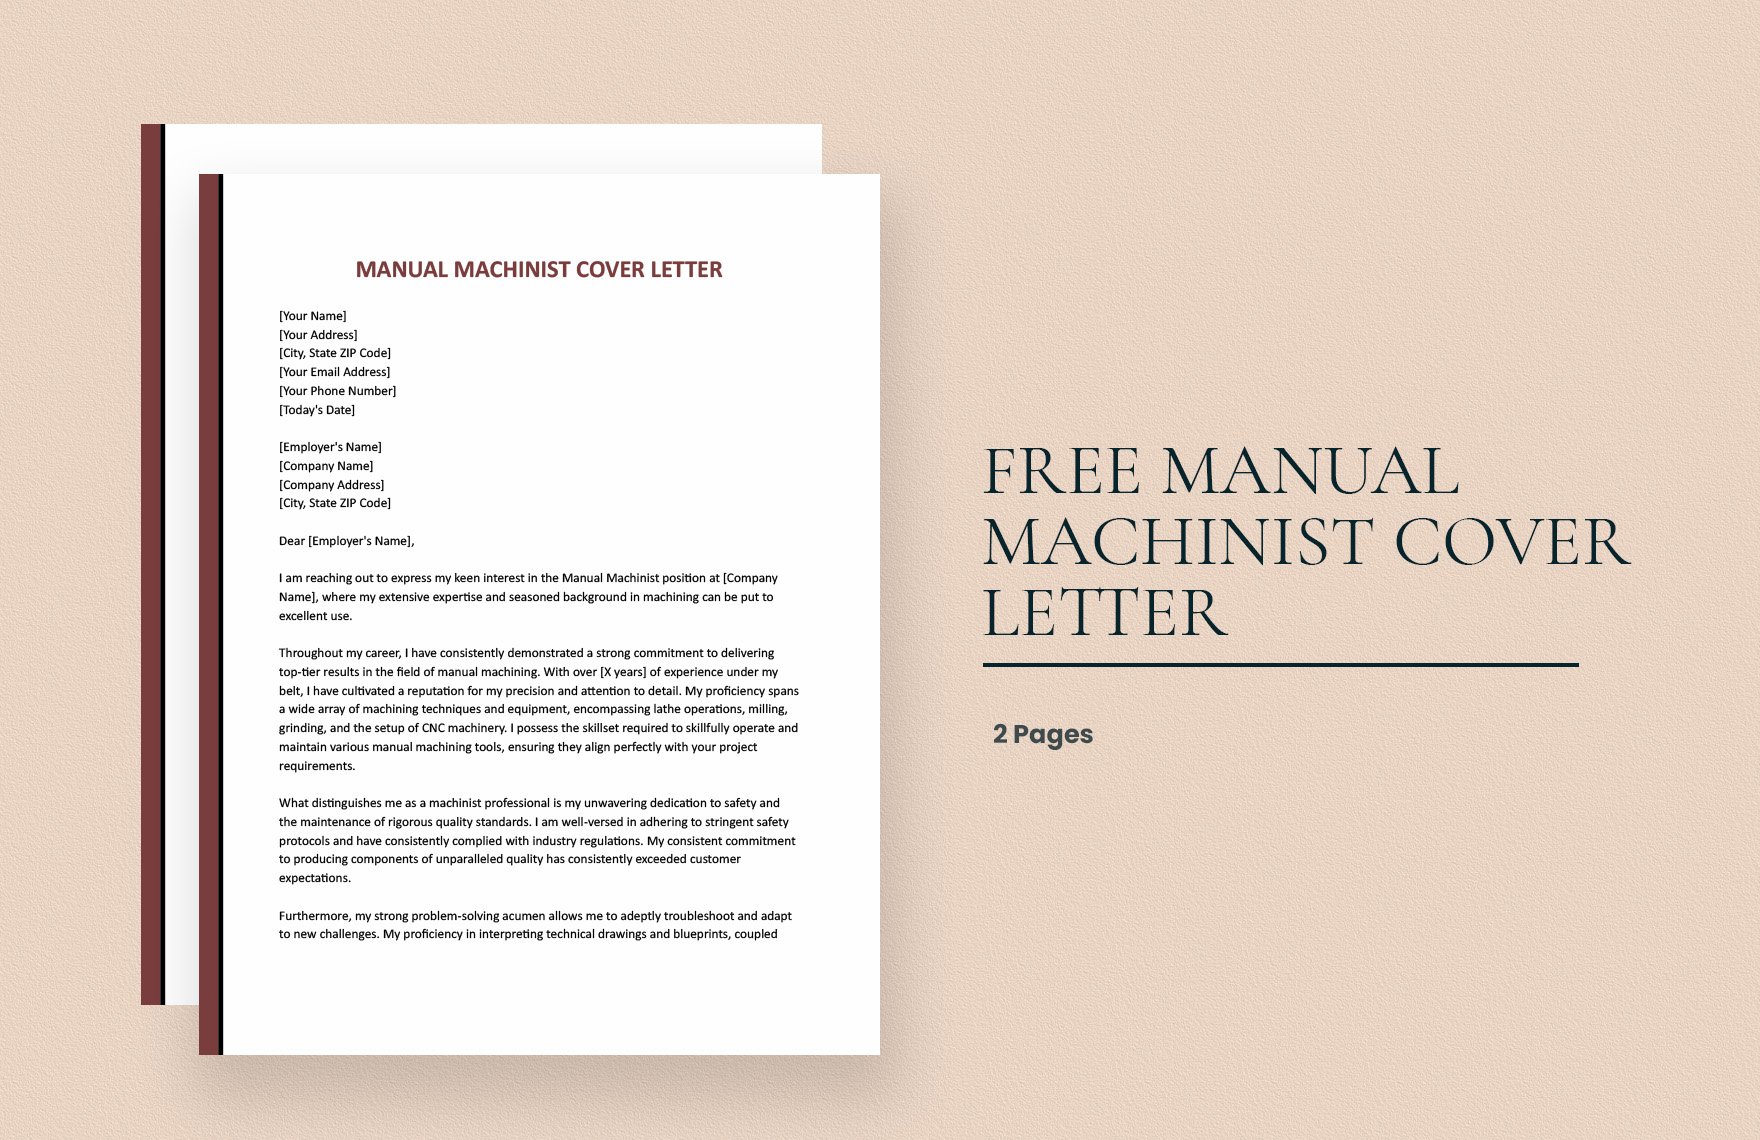 Manual Machinist Cover Letter